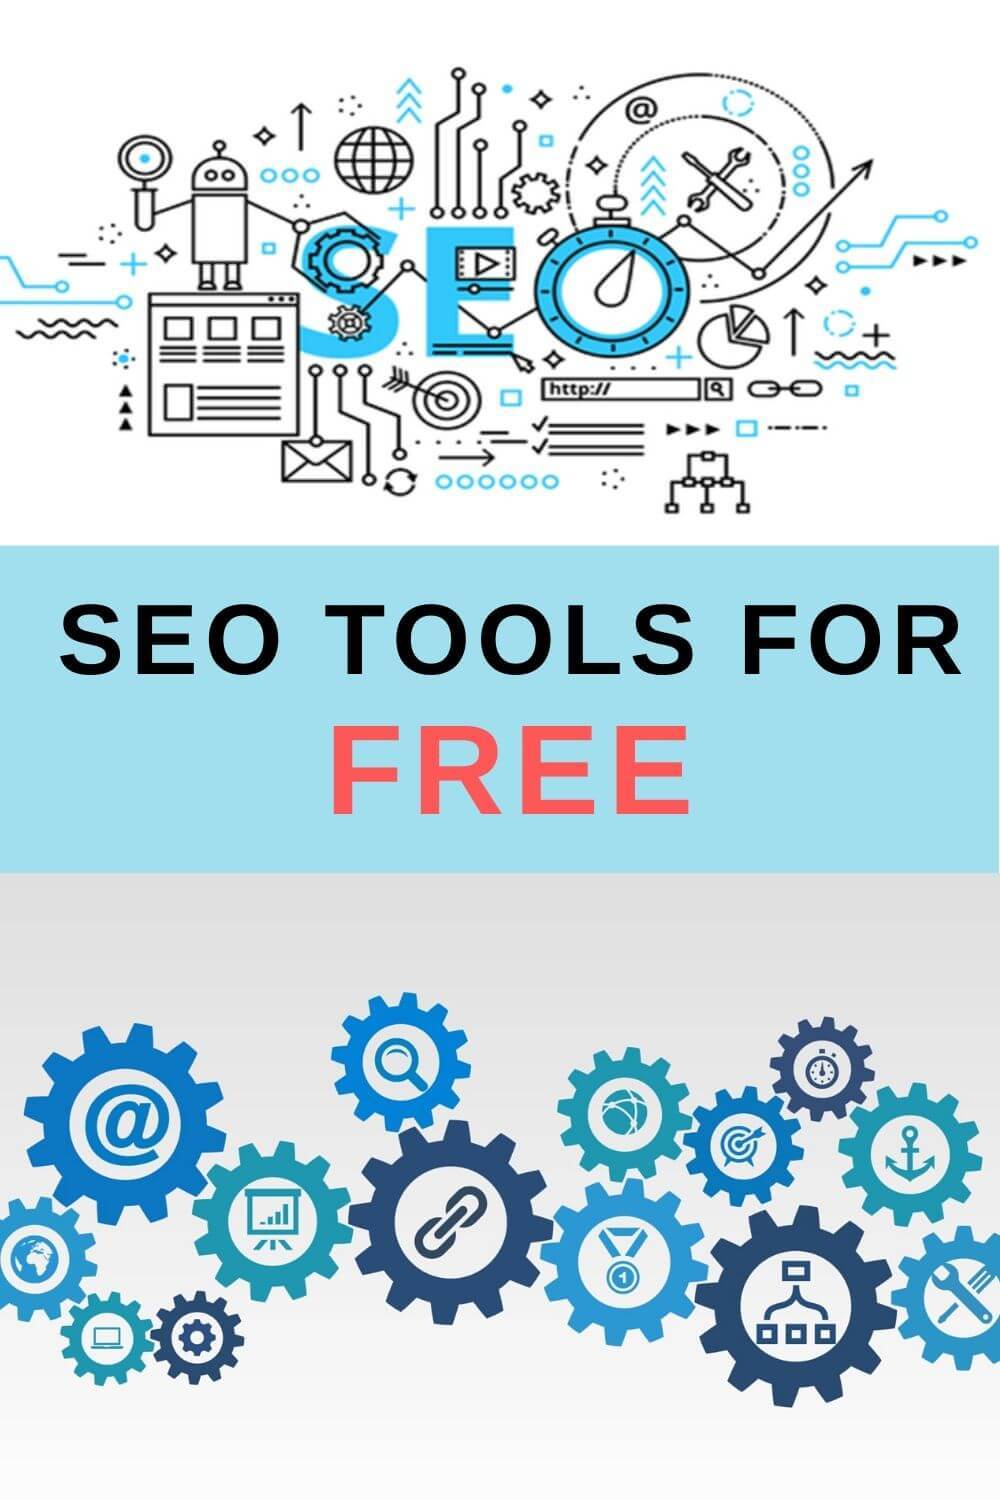 SEO tools for free